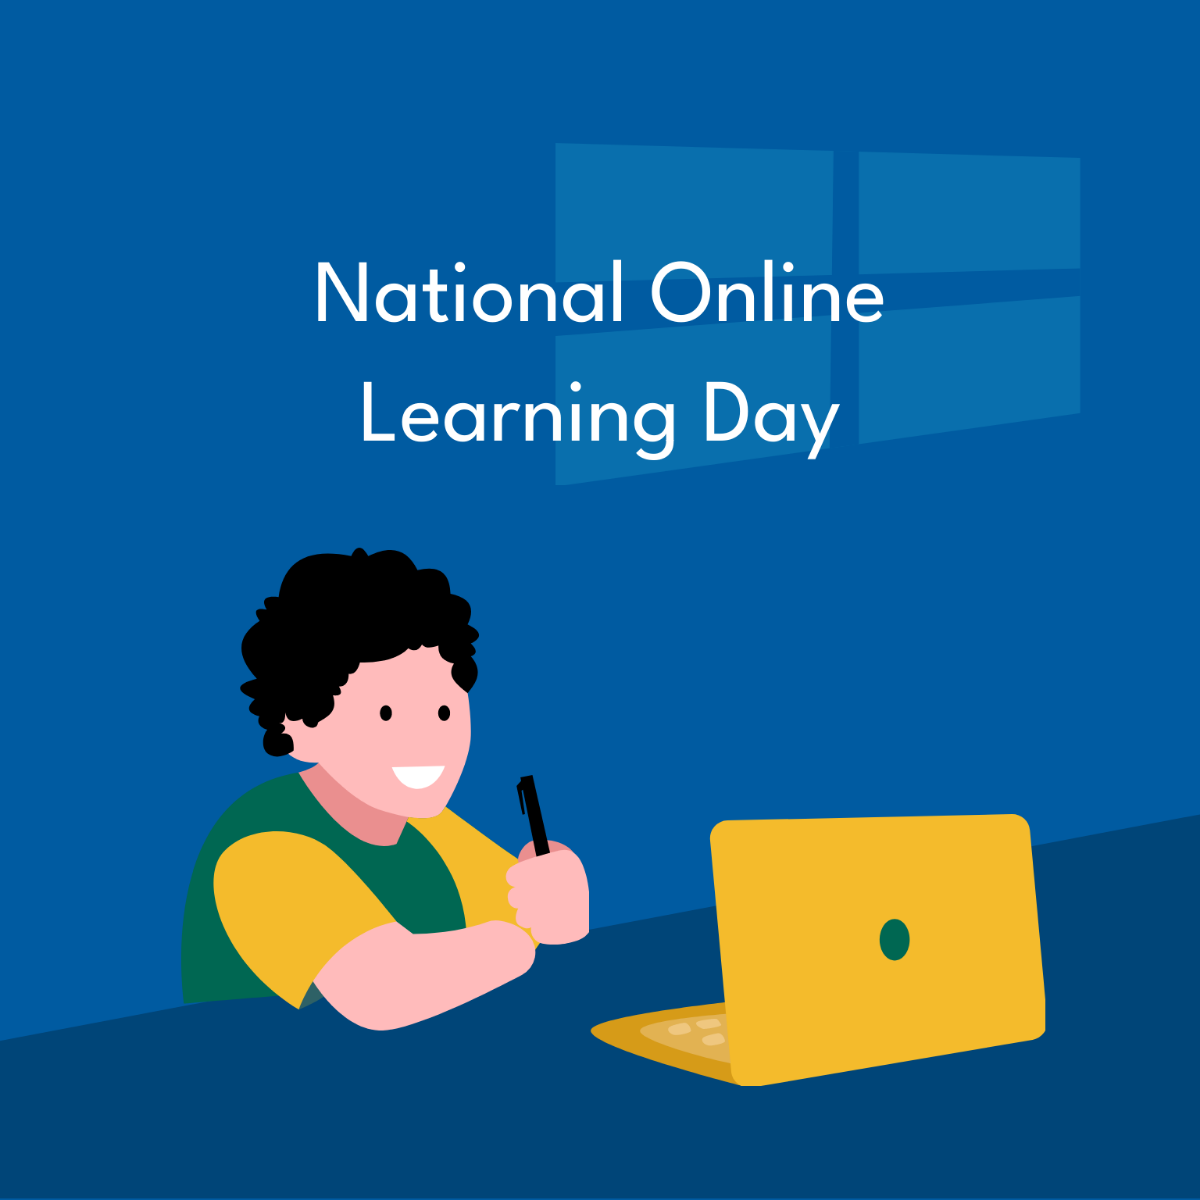 Free National Online Learning Day Illustration Template